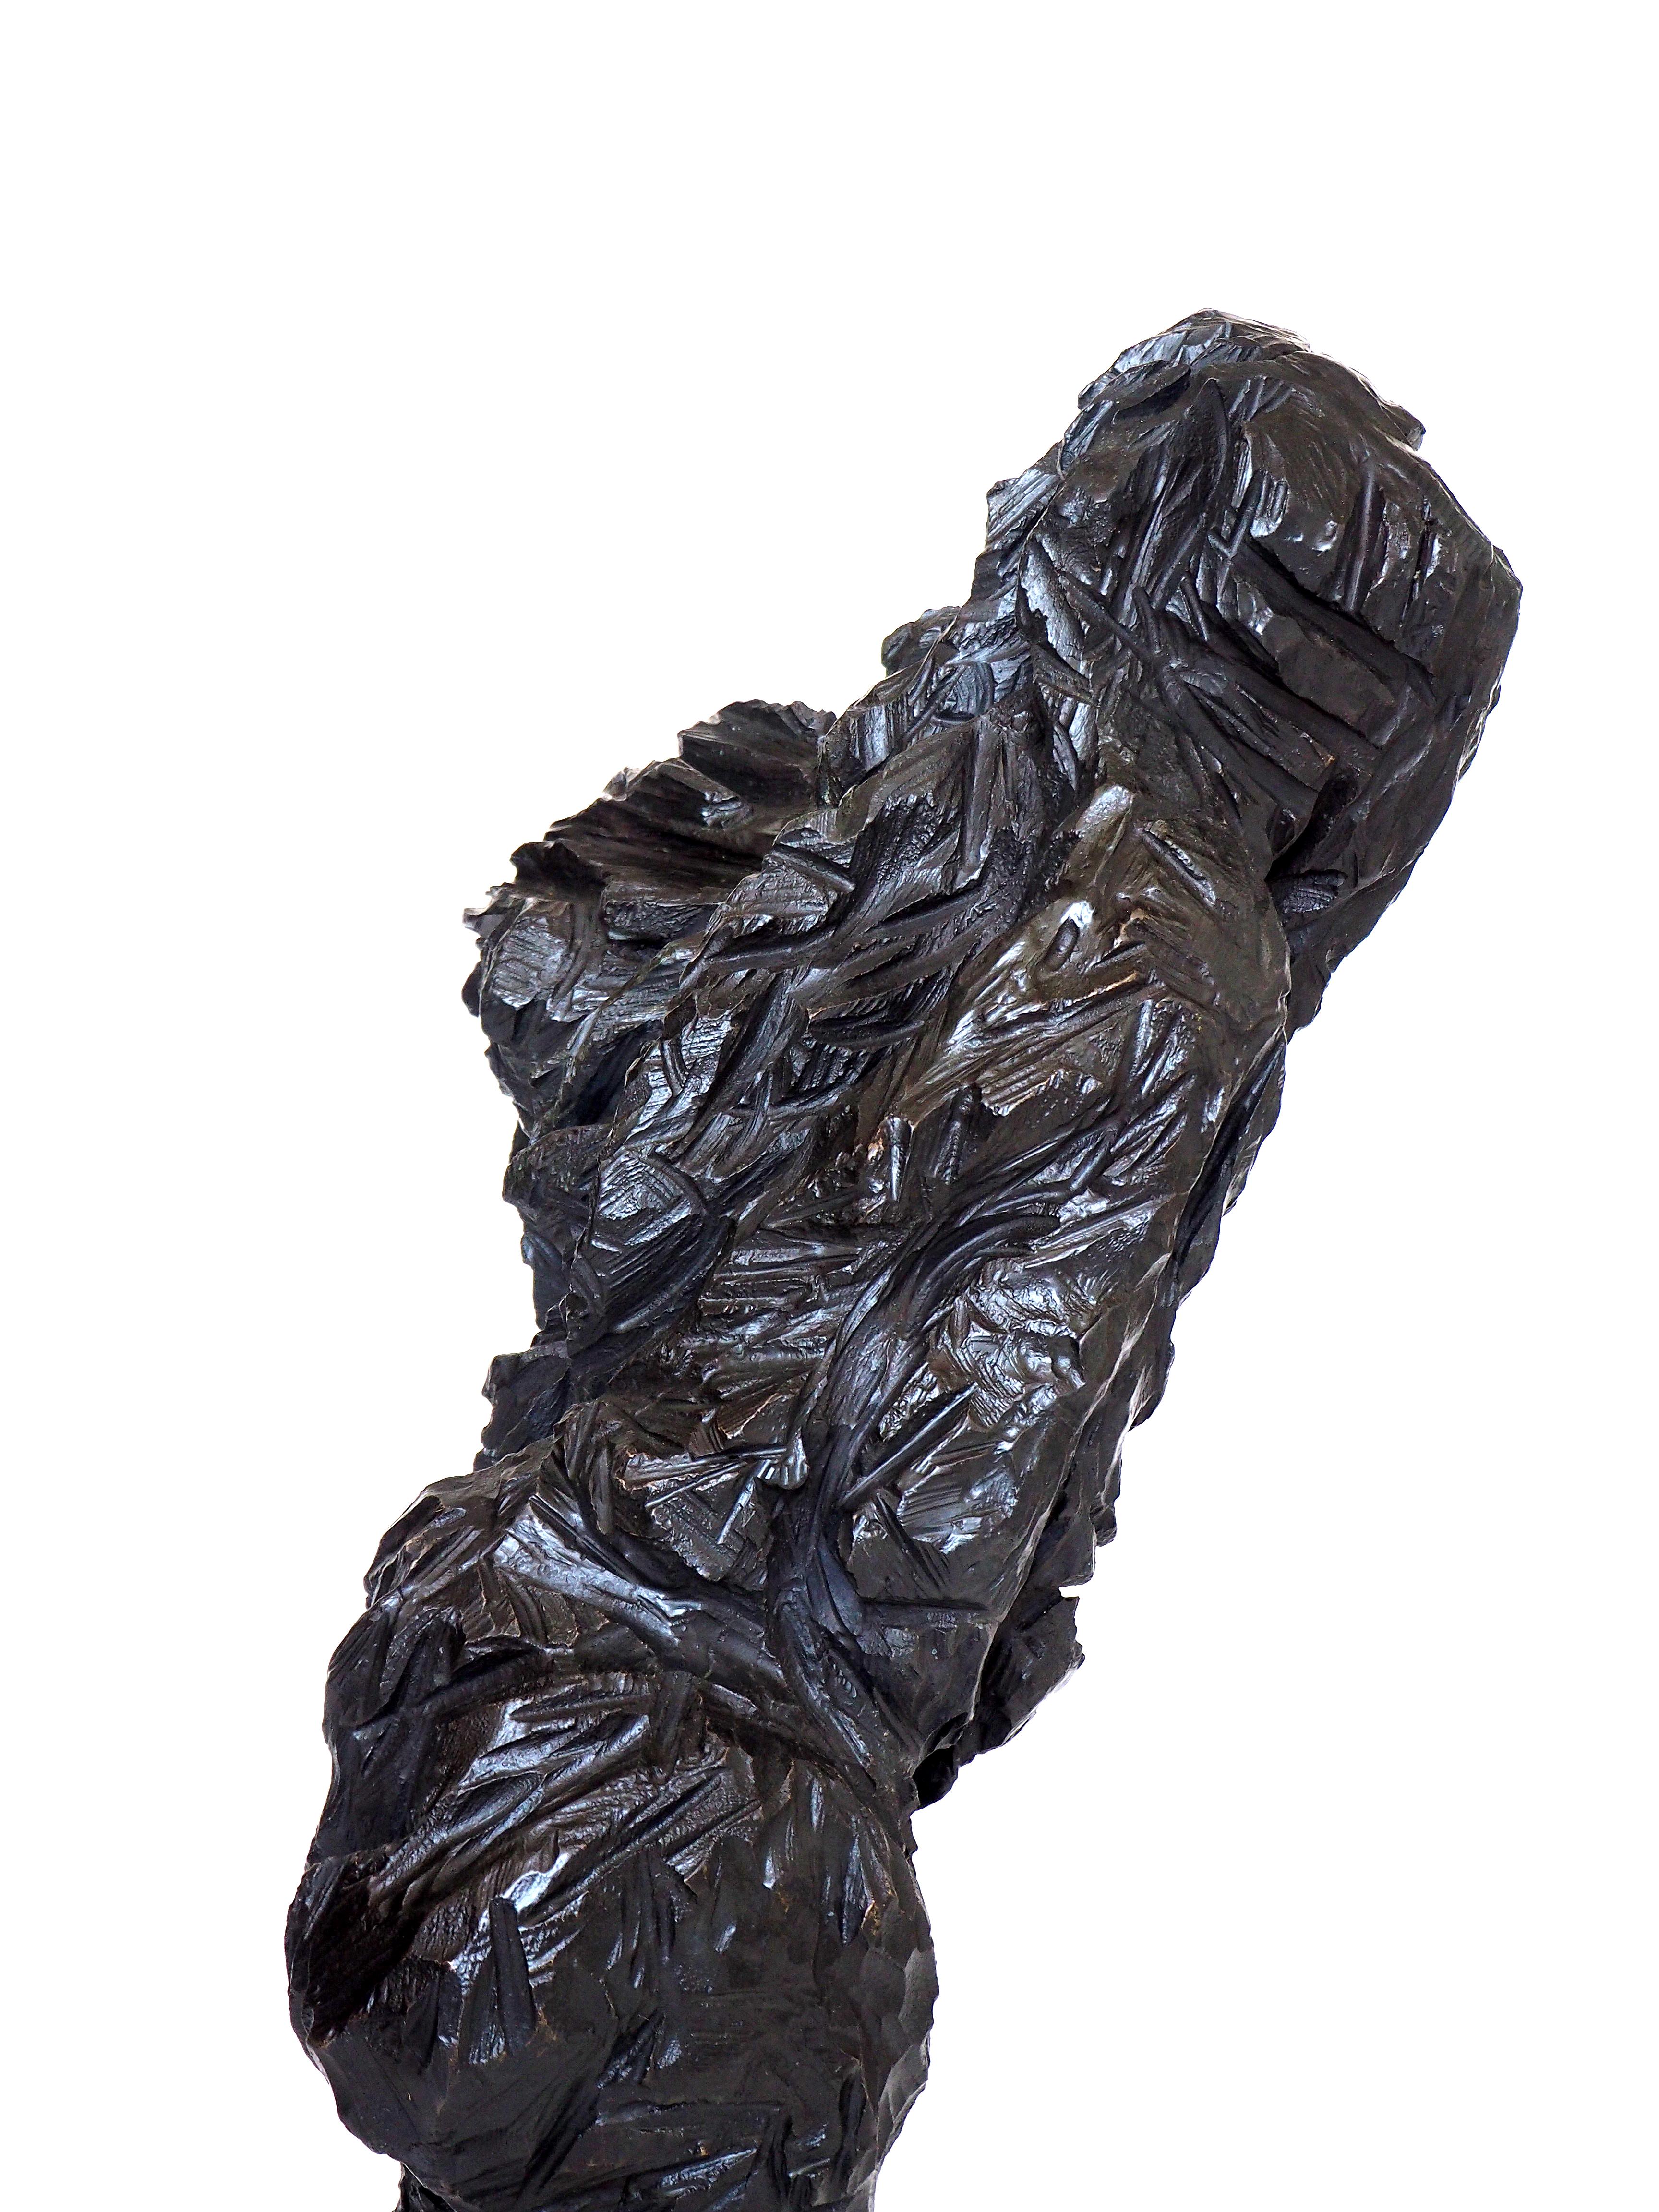 British The Other, Contemporary Original Bronze Sculpture by Artist Jonathan Roson For Sale